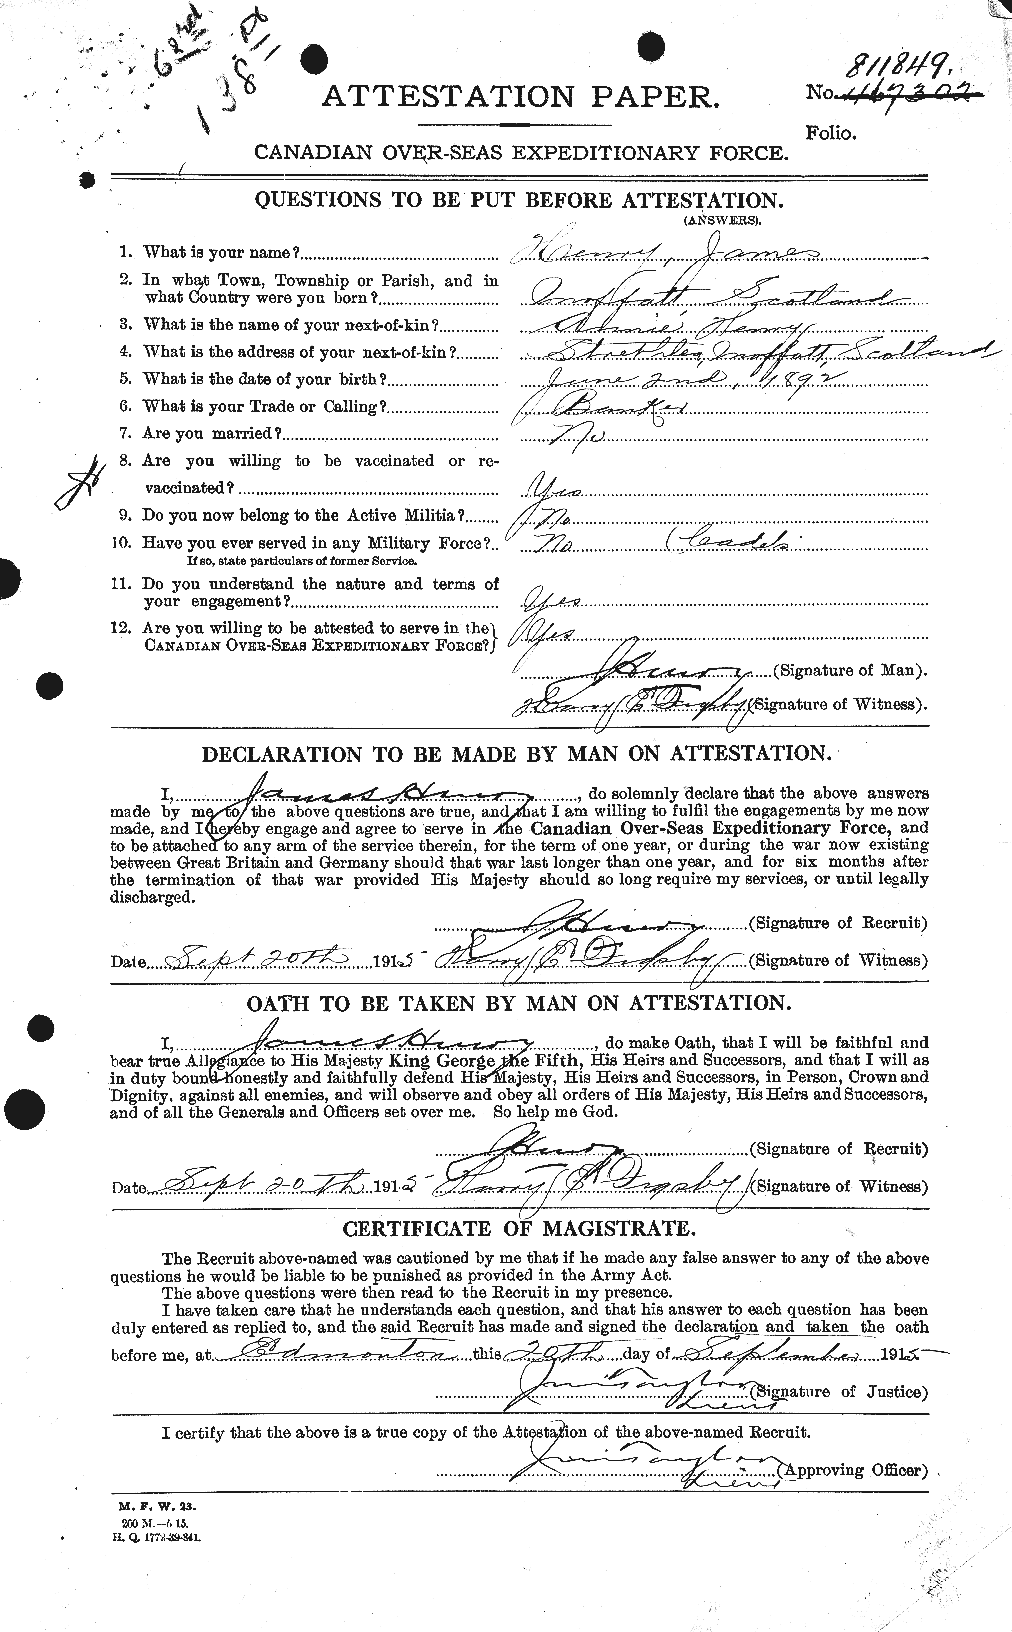 Personnel Records of the First World War - CEF 387590a